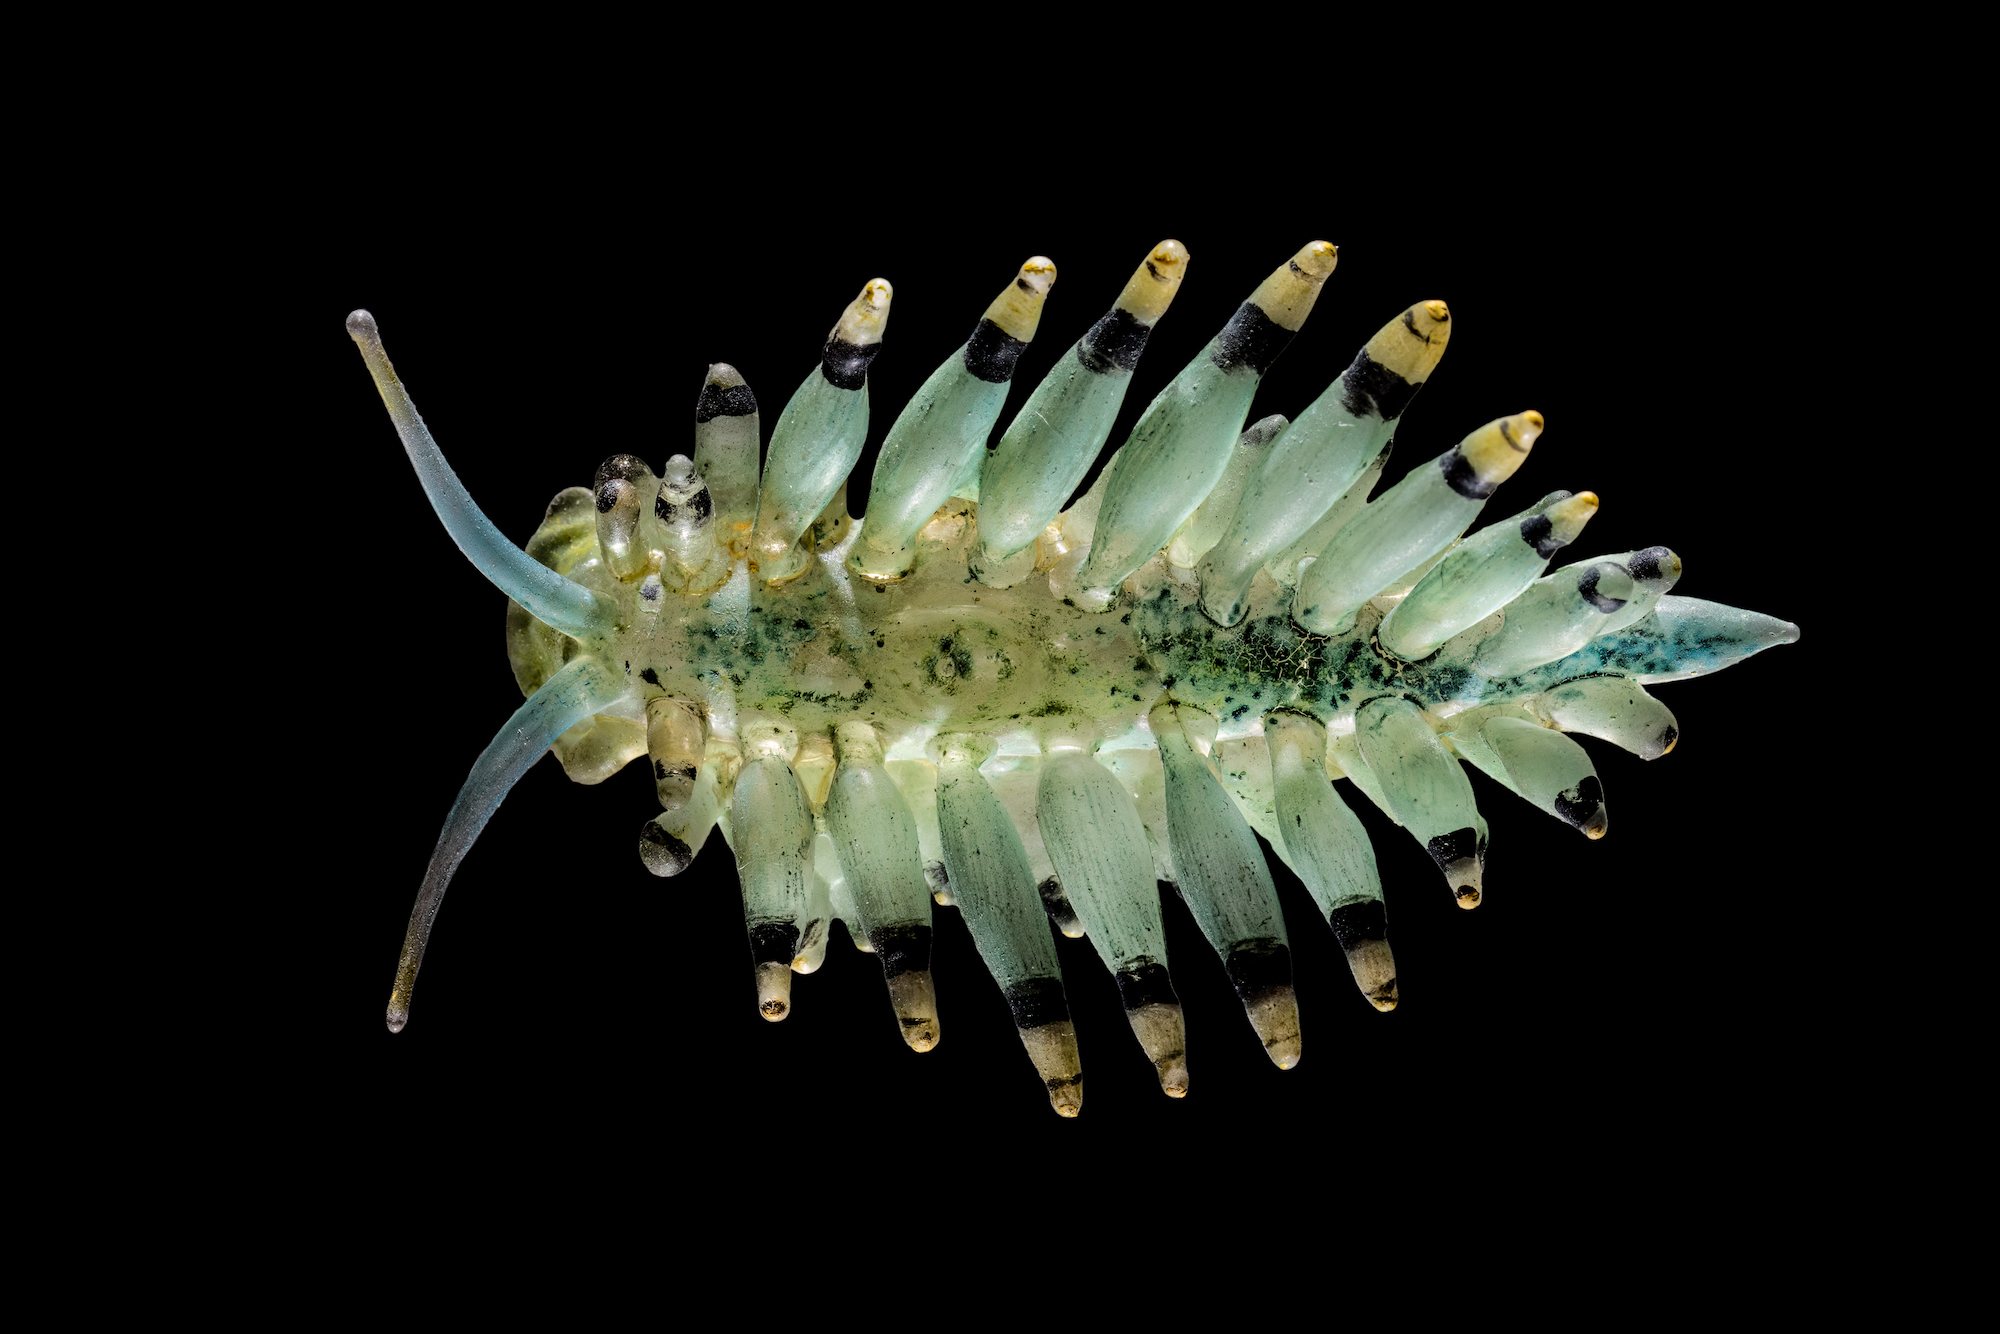 A realistic glass model of a sea creature with antennae and colorful soft spikes.